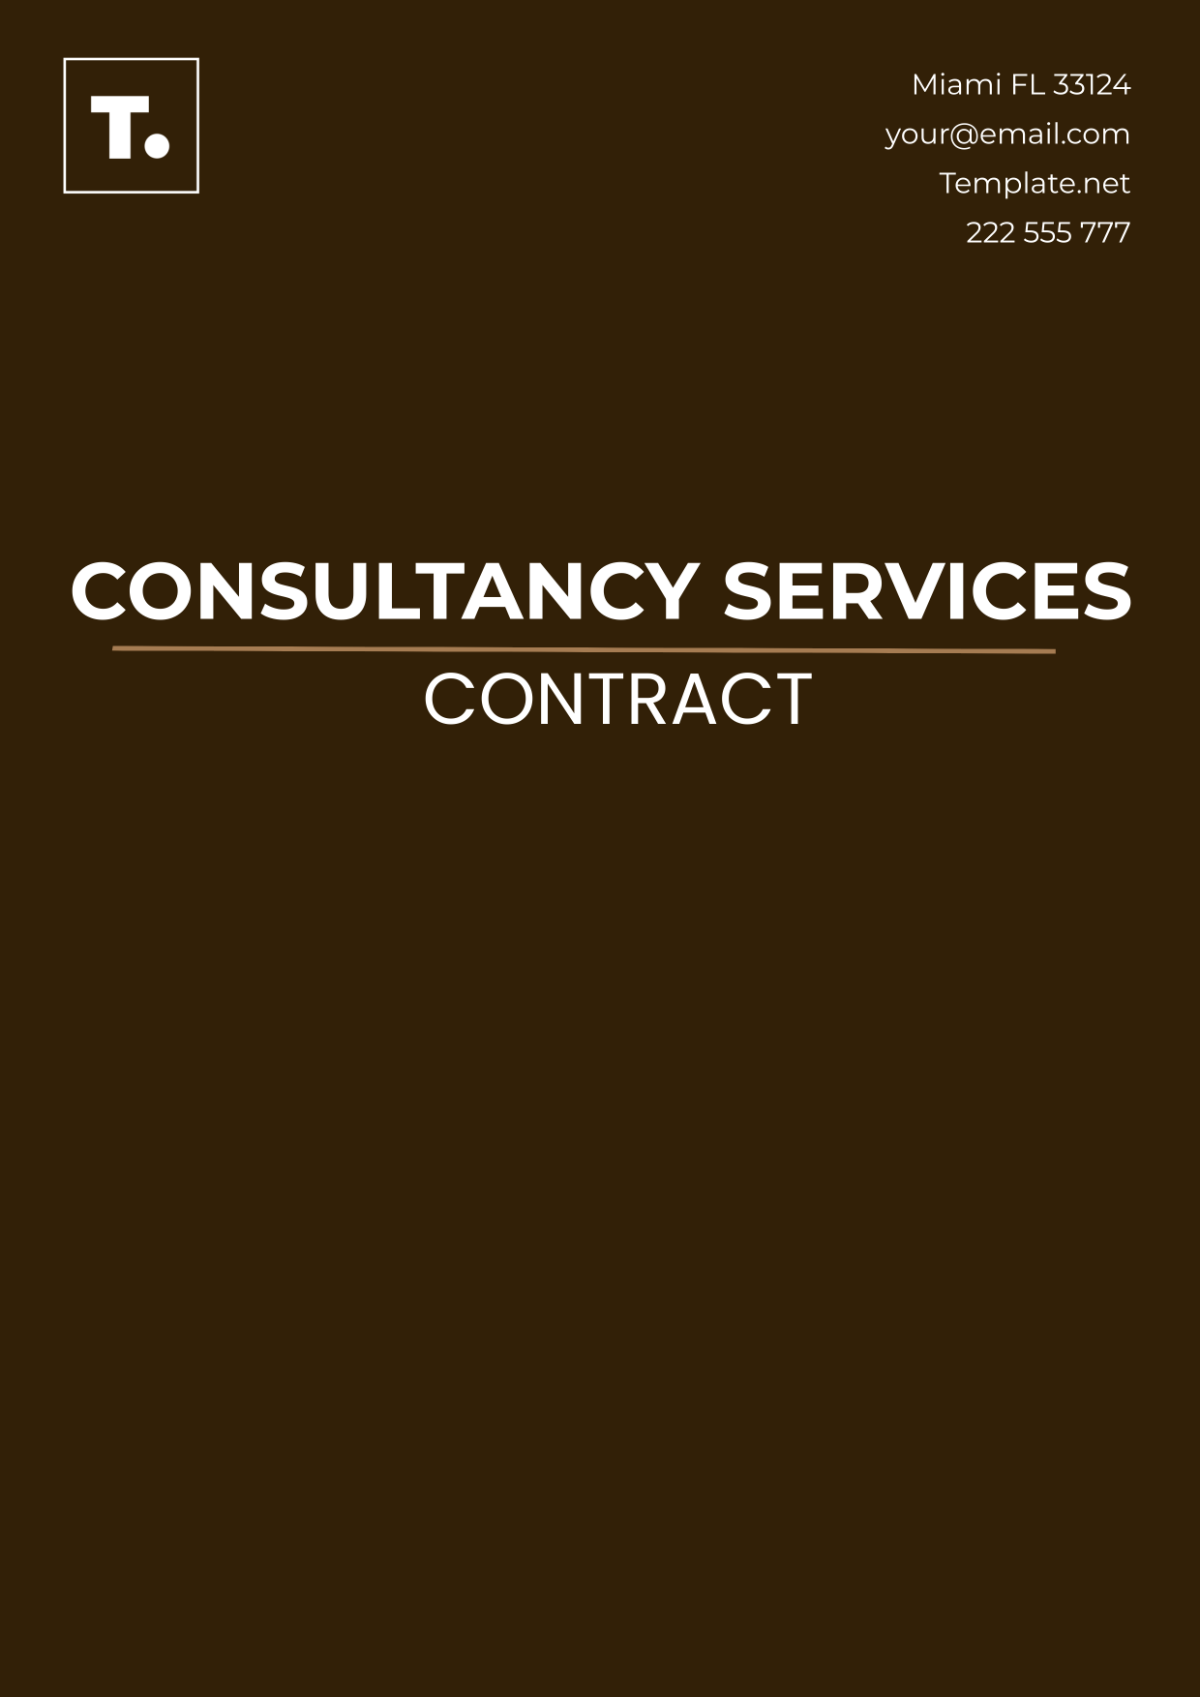 Free Consultancy Services Contract Template